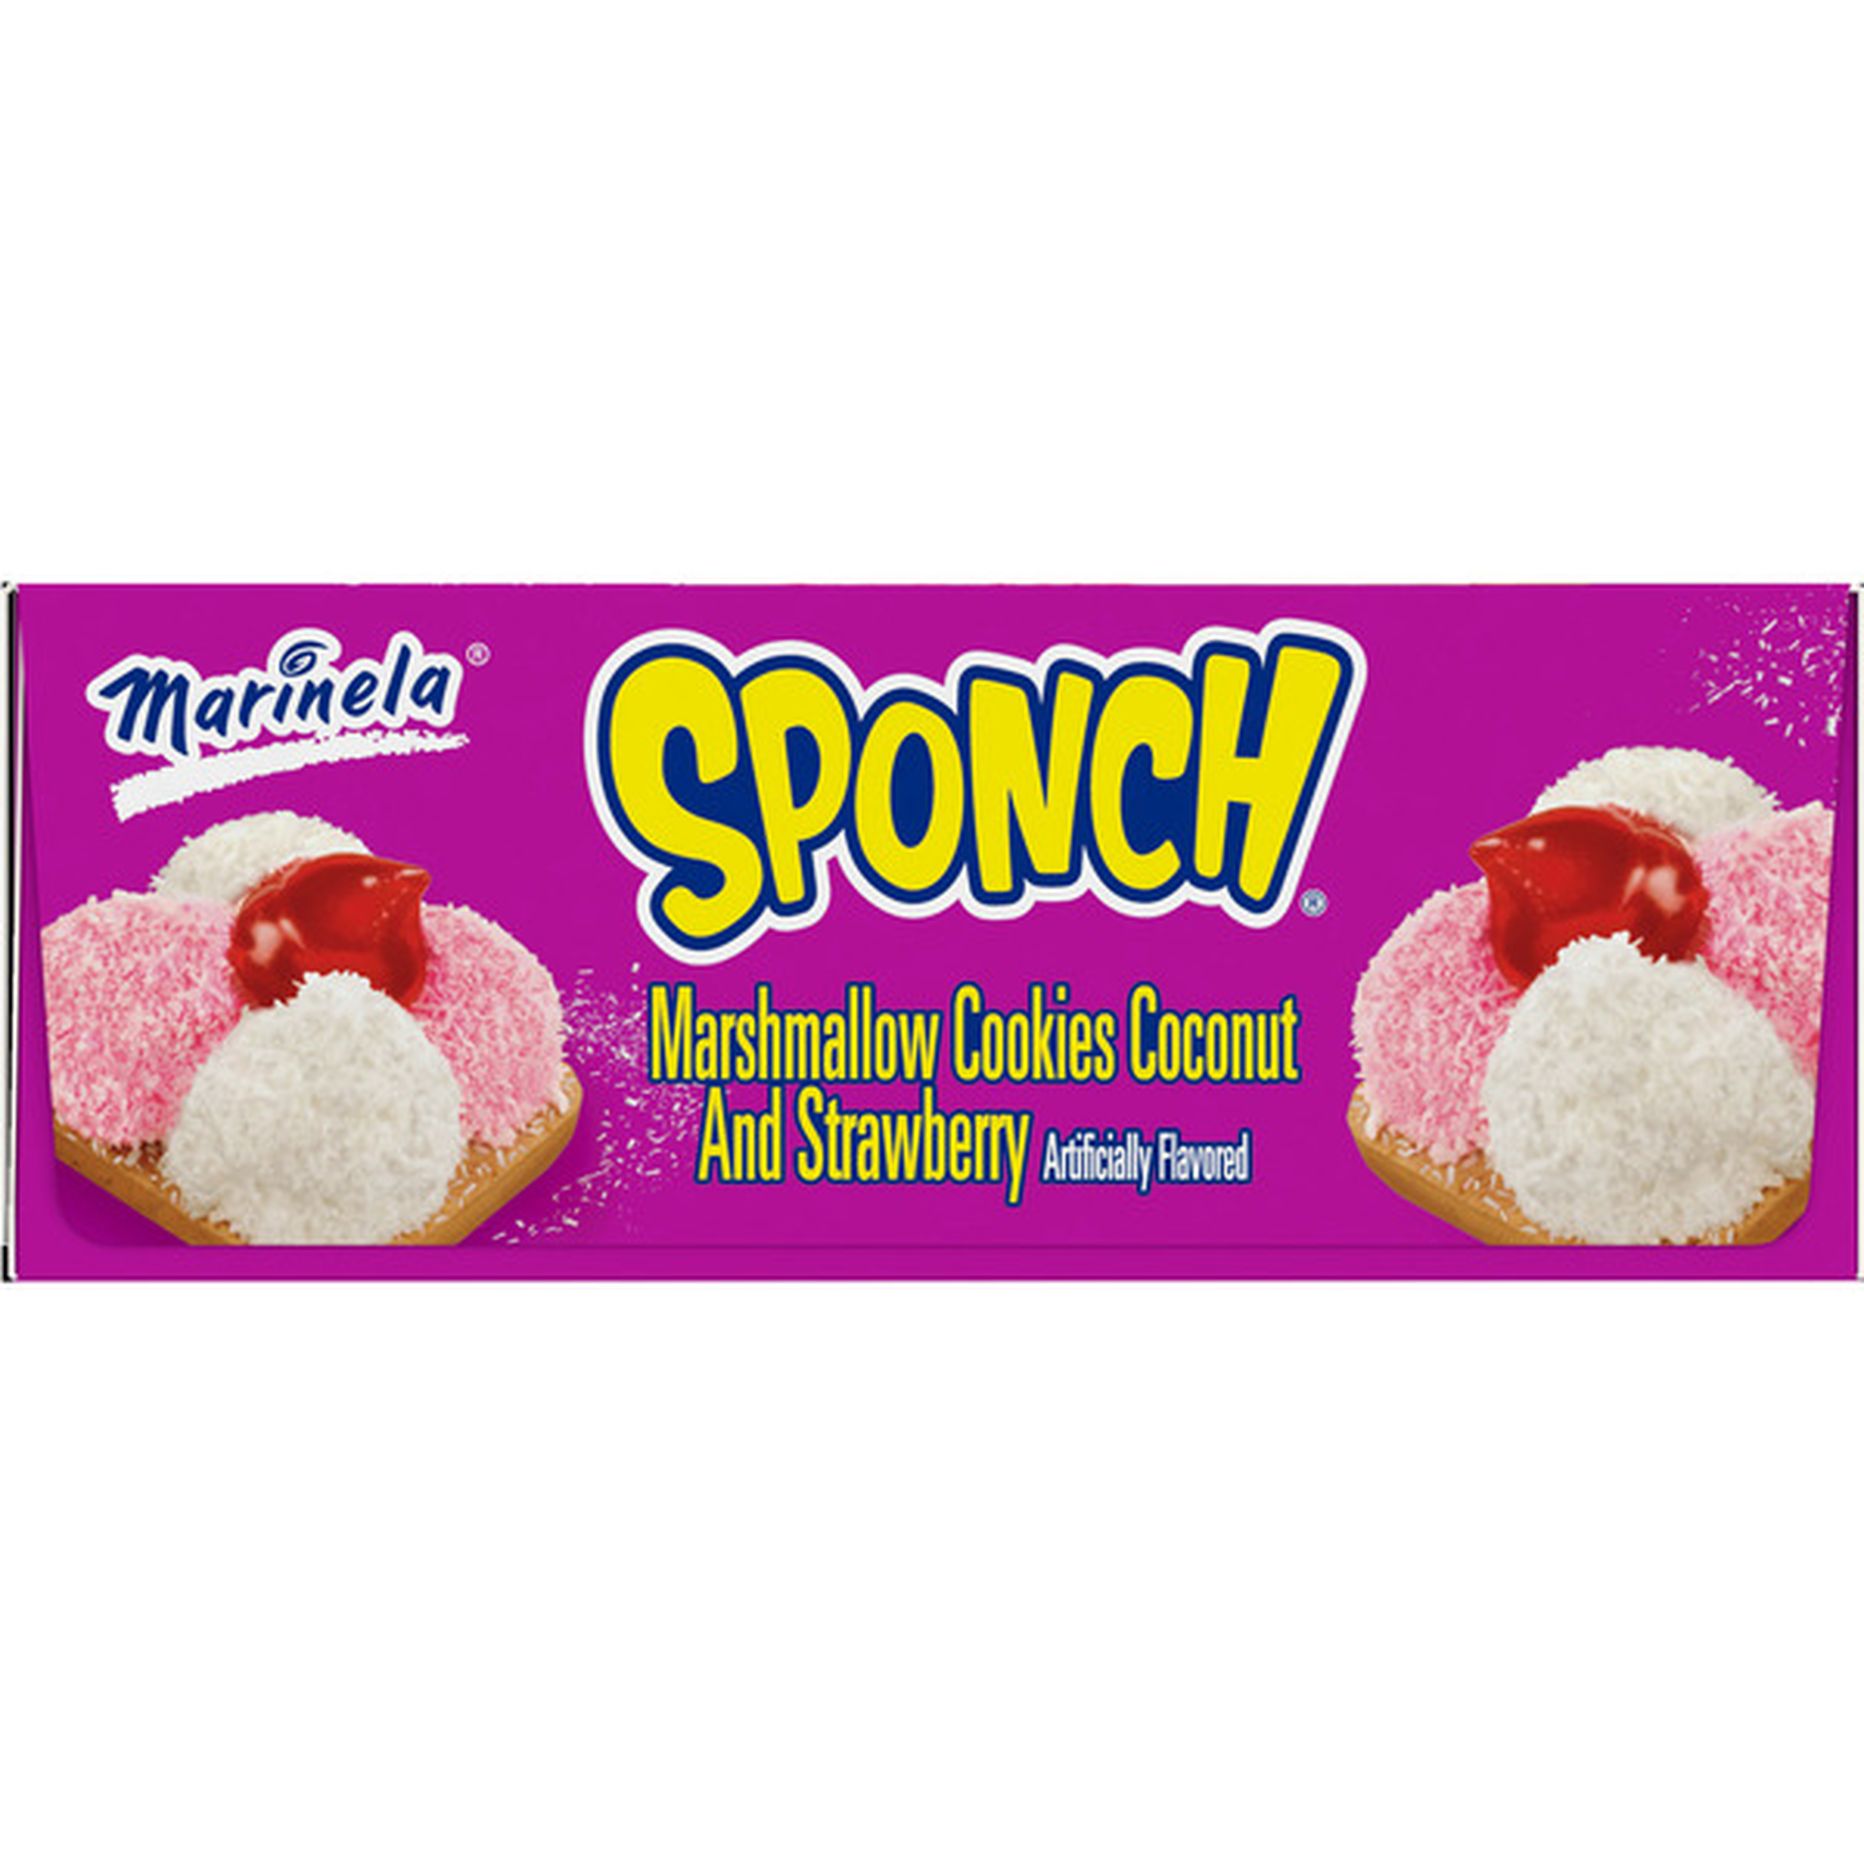 Marinela Gansito Sponch Marshmallow Cookies 32 Oz Delivery Or Pickup Near Me Instacart 3750